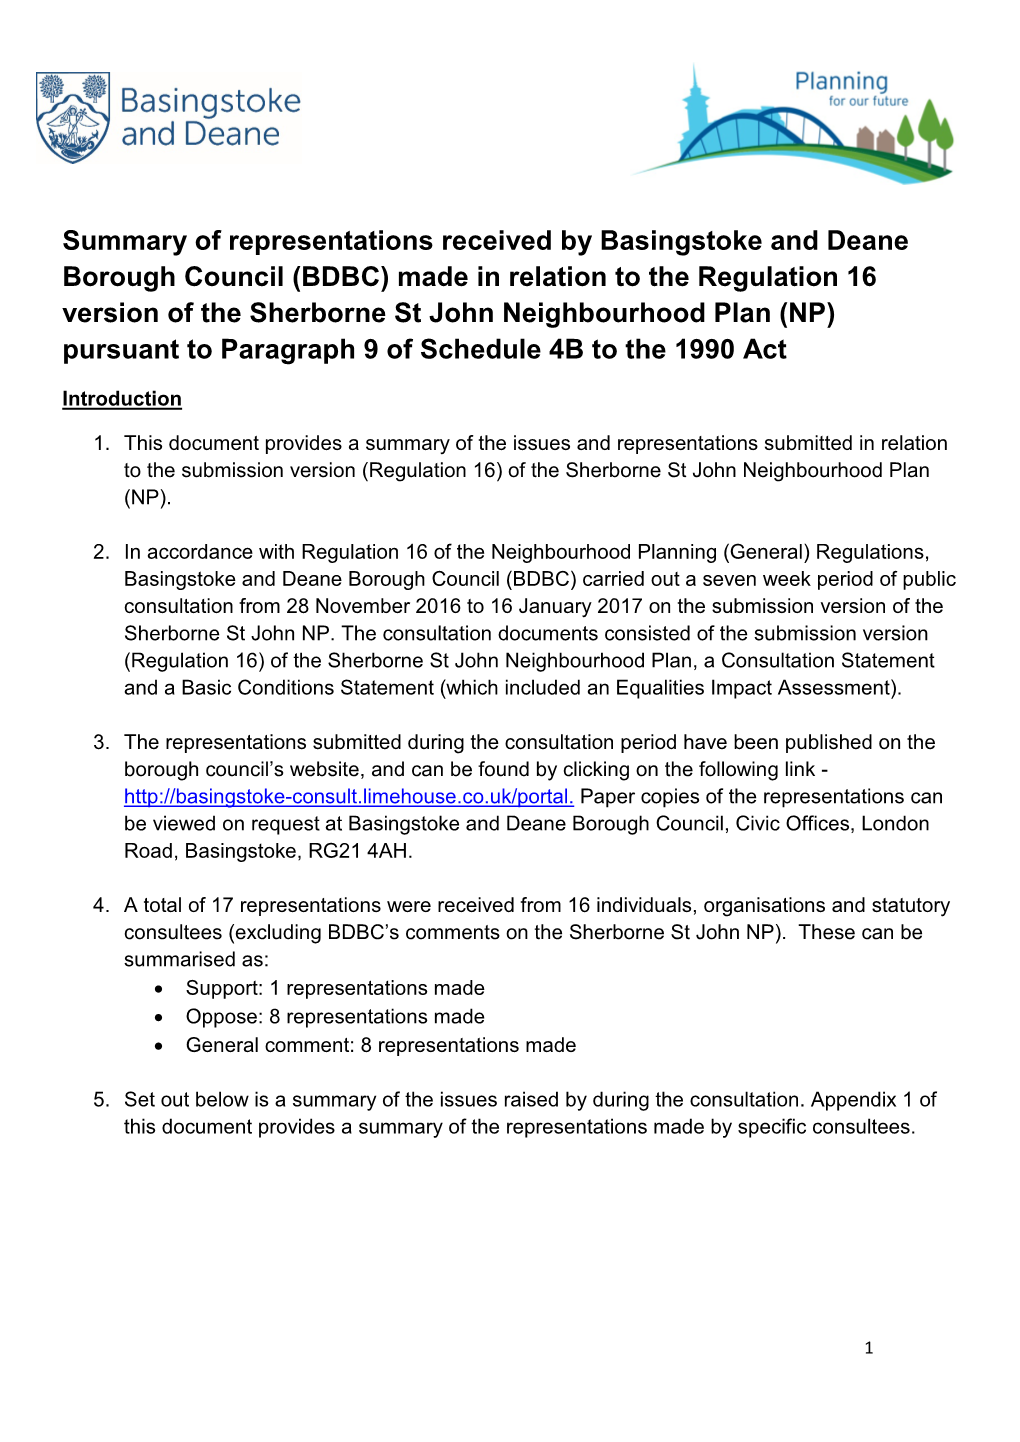 (BDBC) Made in Relation to the Regulation 16 Version of the Sherborne St John Neighbourhood Plan (NP) Pursuant to Paragraph 9 of Schedule 4B to the 1990 Act